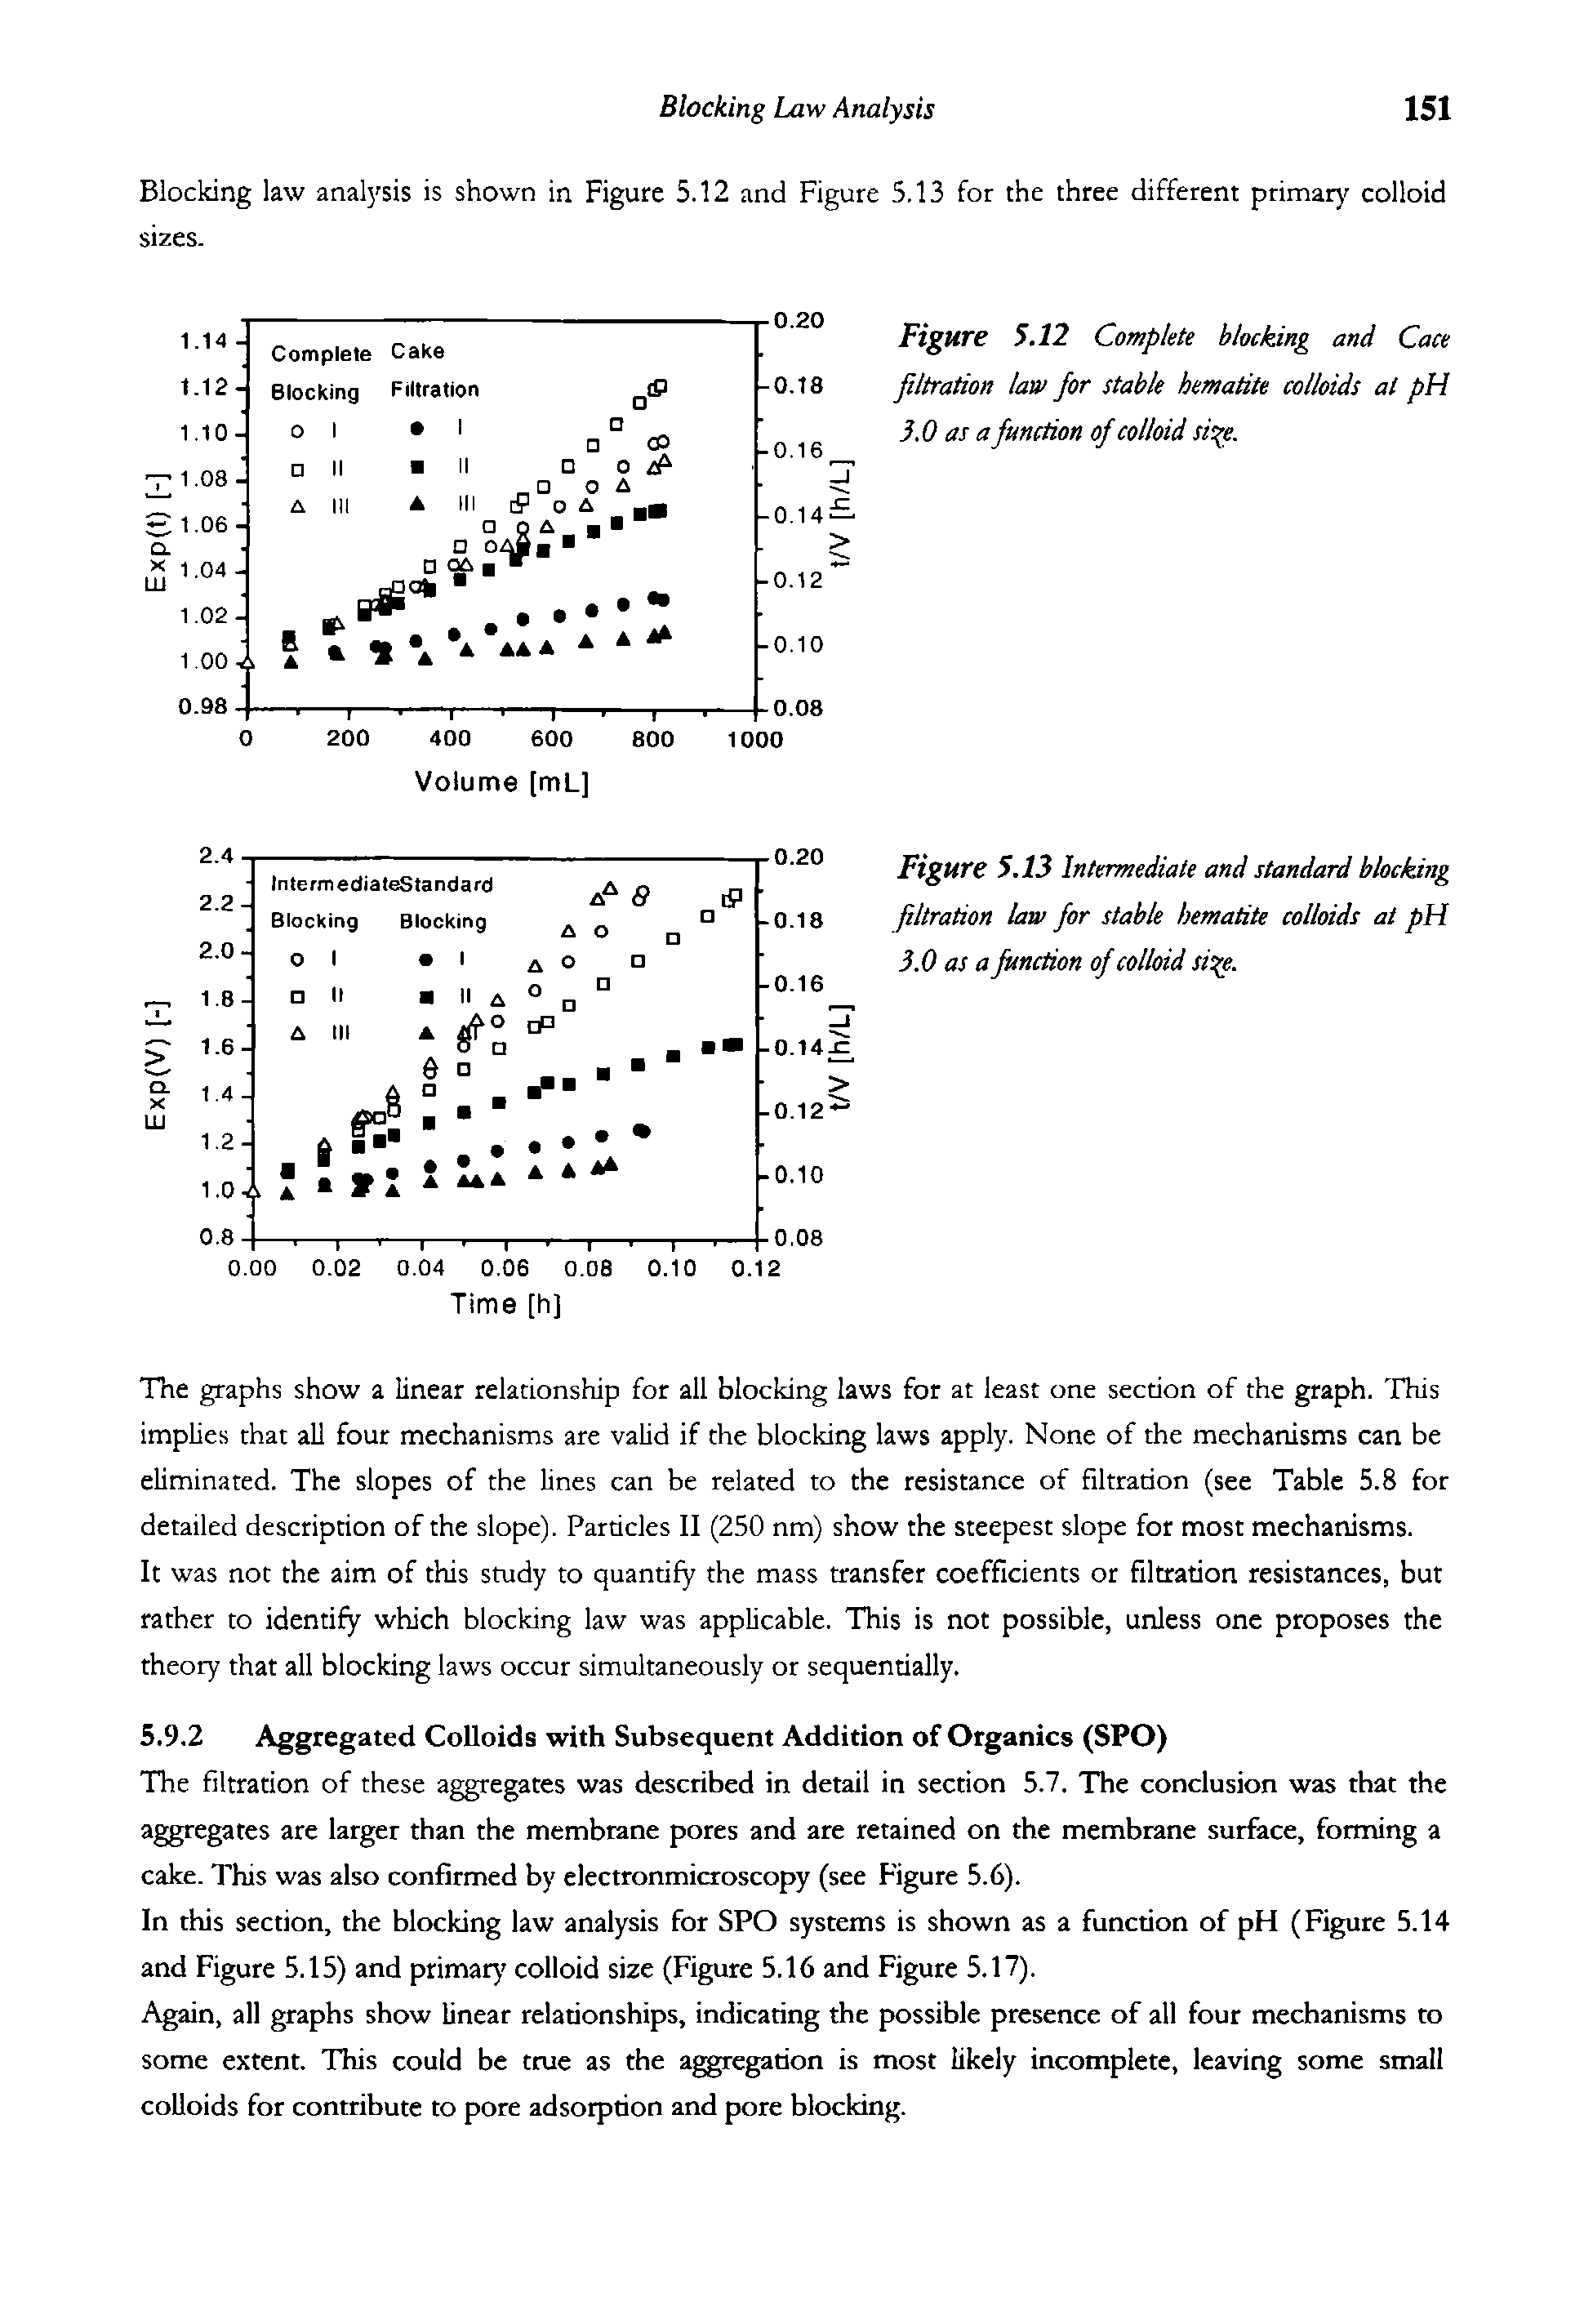 Figure 5.12 Complete blocking and Cace filtration law for stable hematite colloids at pH 3.0 as a function of colloid si e.